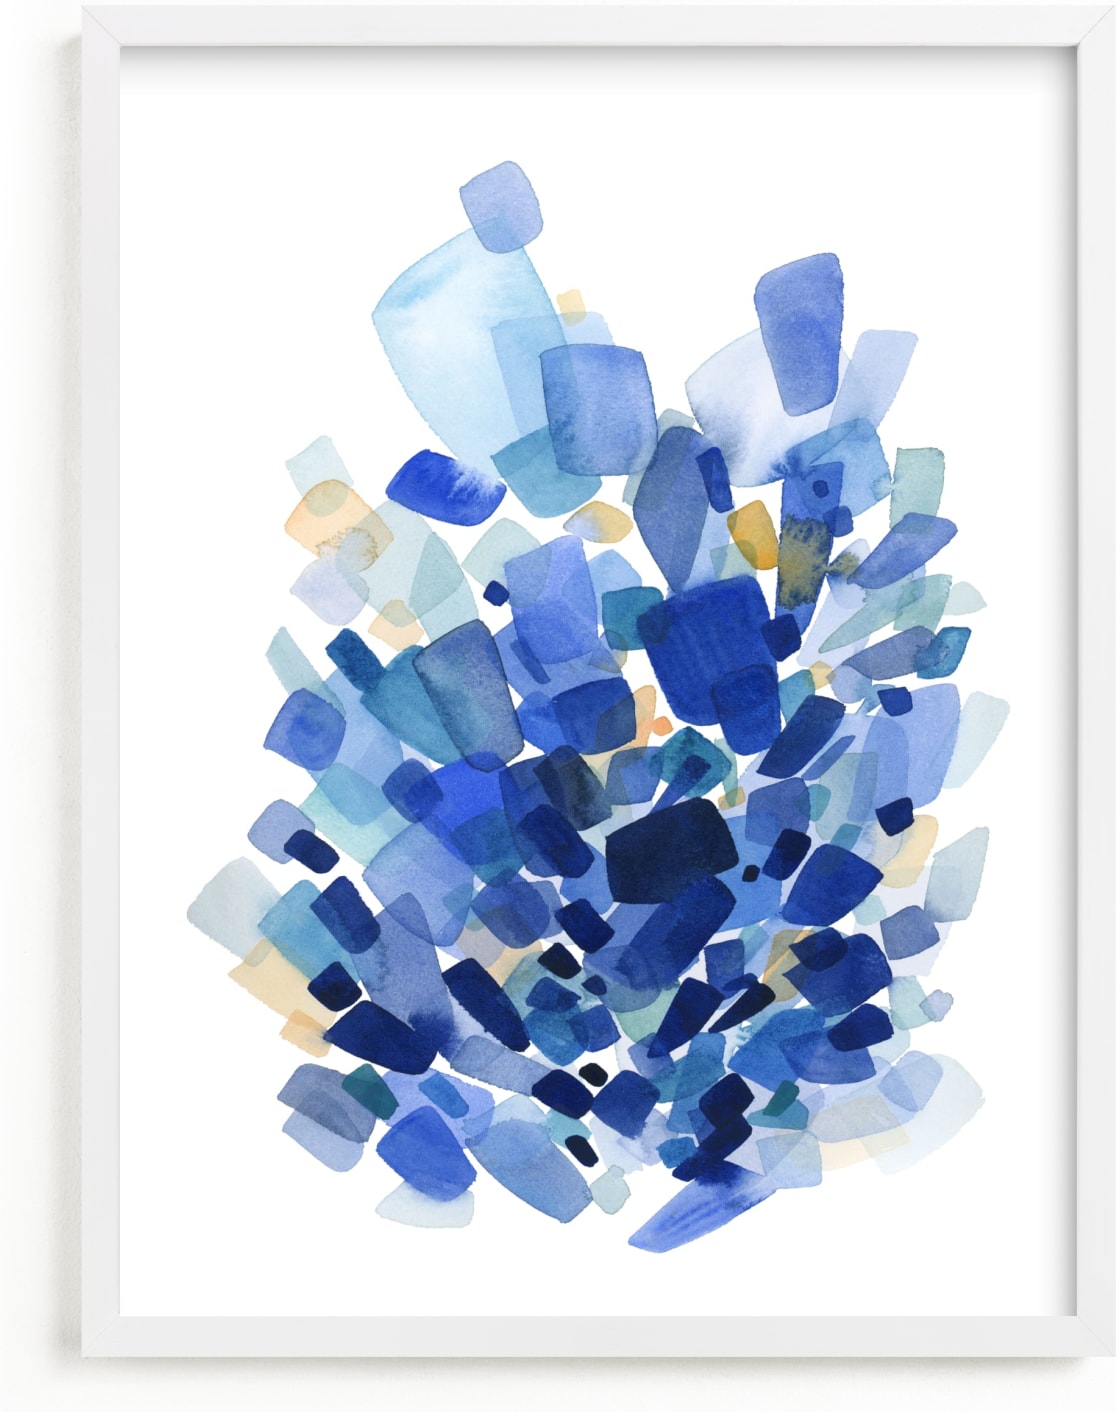 This is a blue art by Yao Cheng Design called Sea Glass.